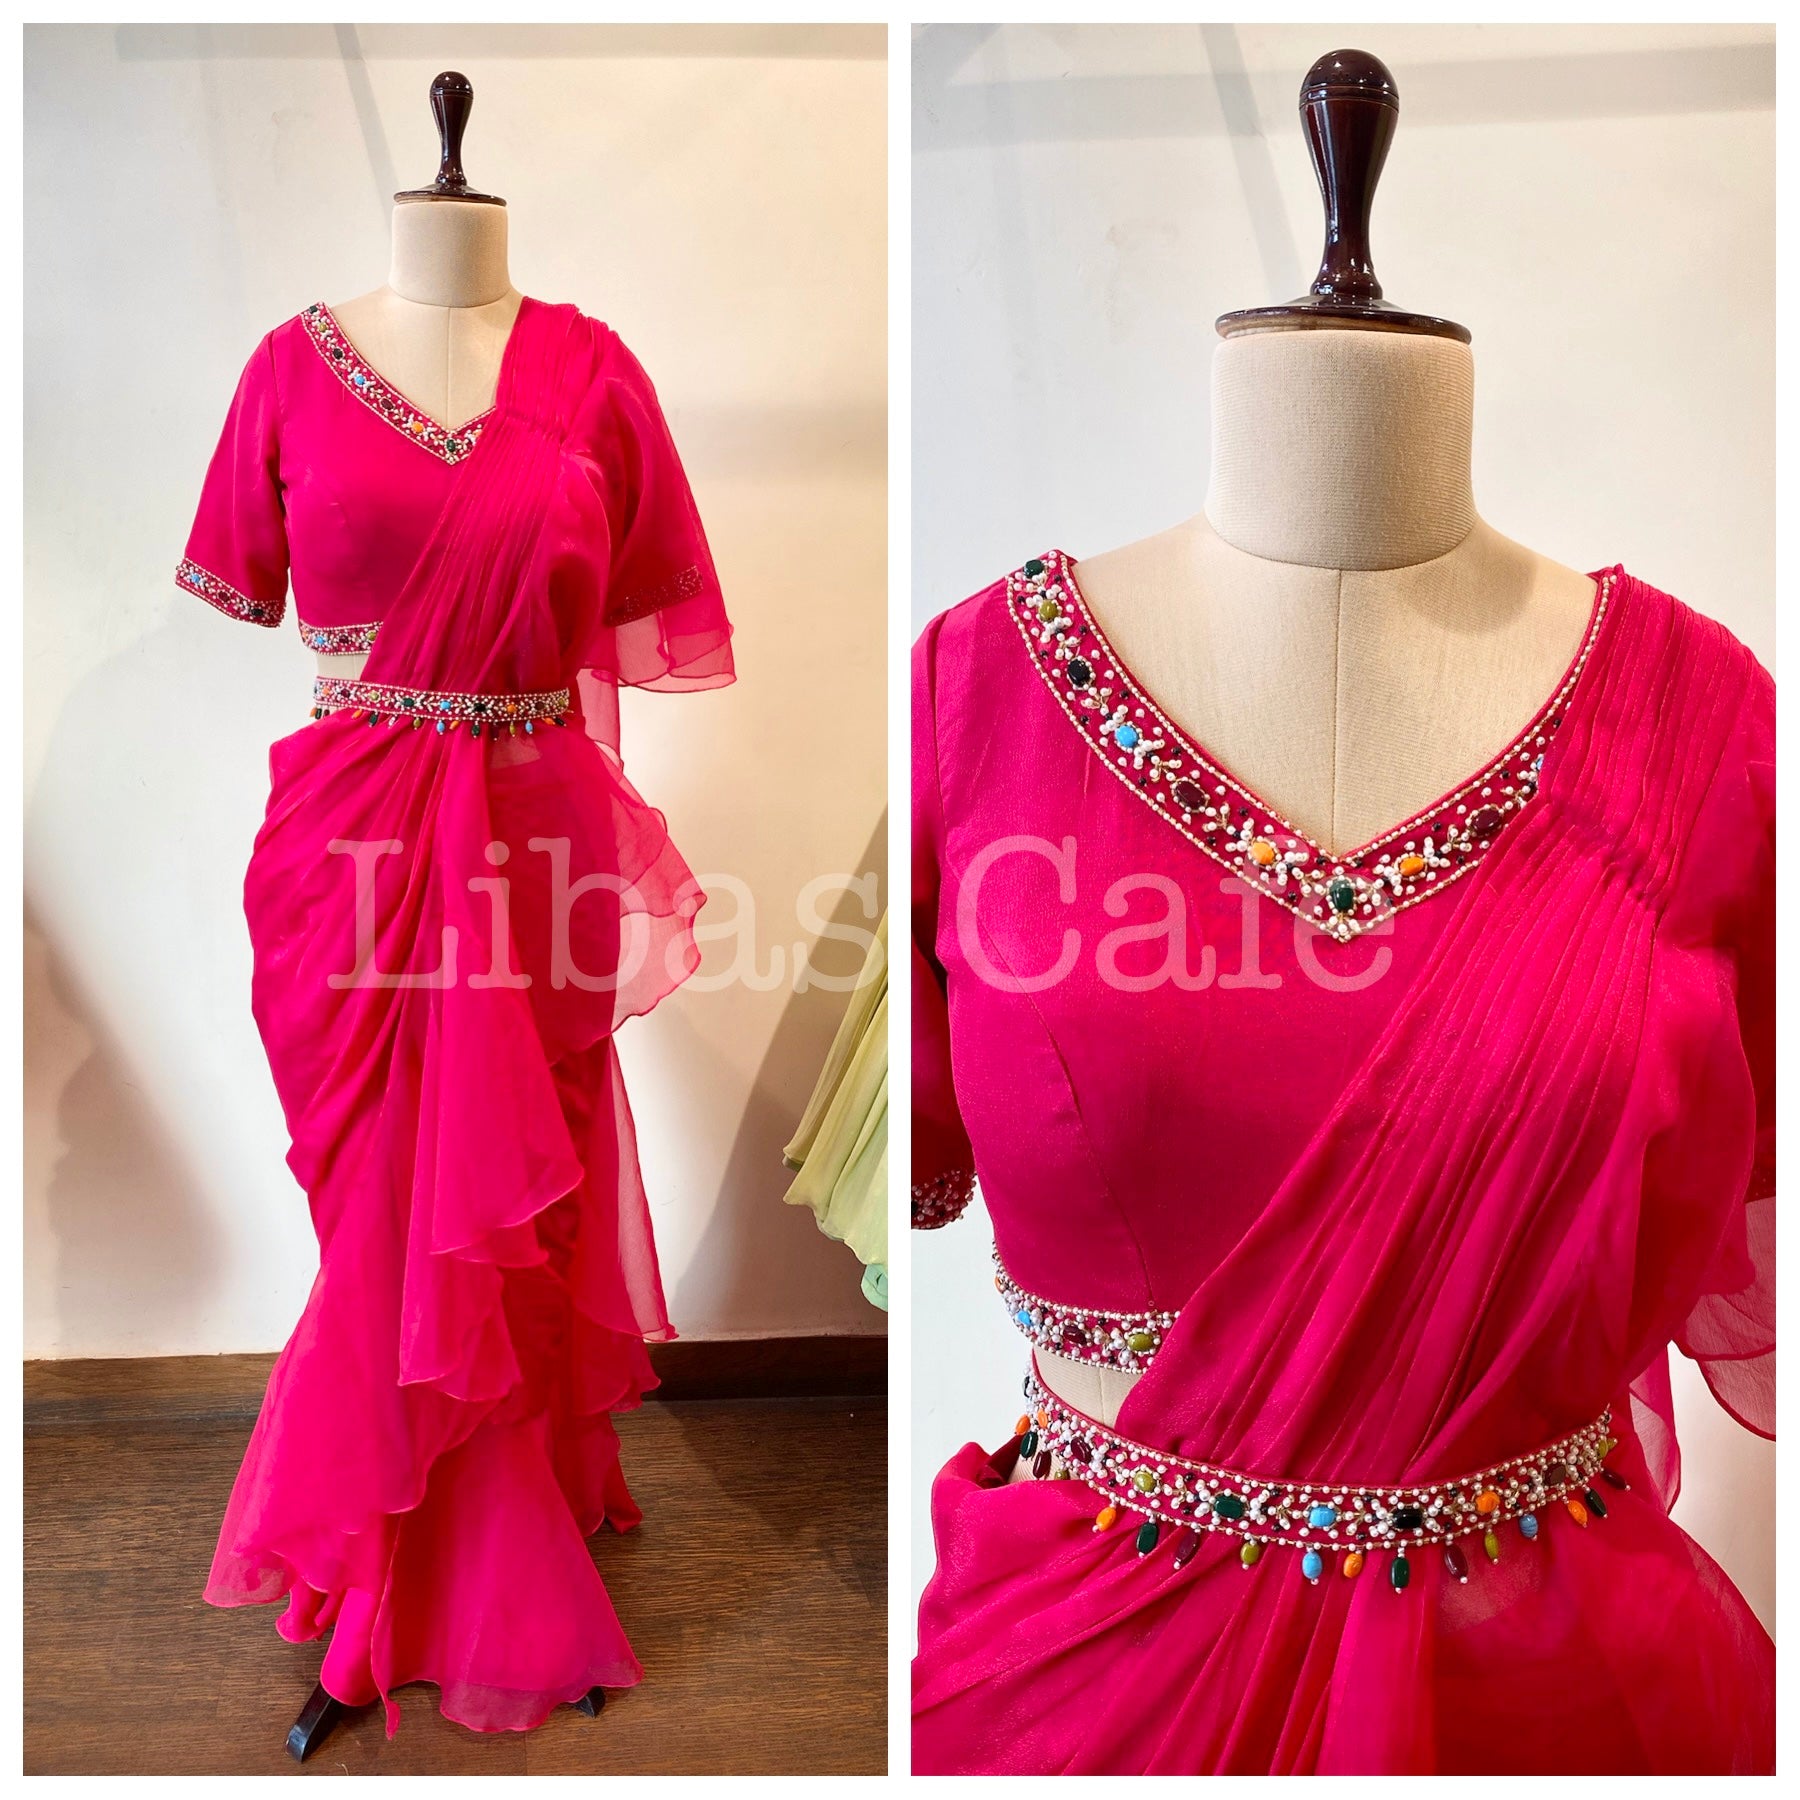 Black Ruffle Belt Saree With Hanging Stones Embroidery – LIBAS CAFE